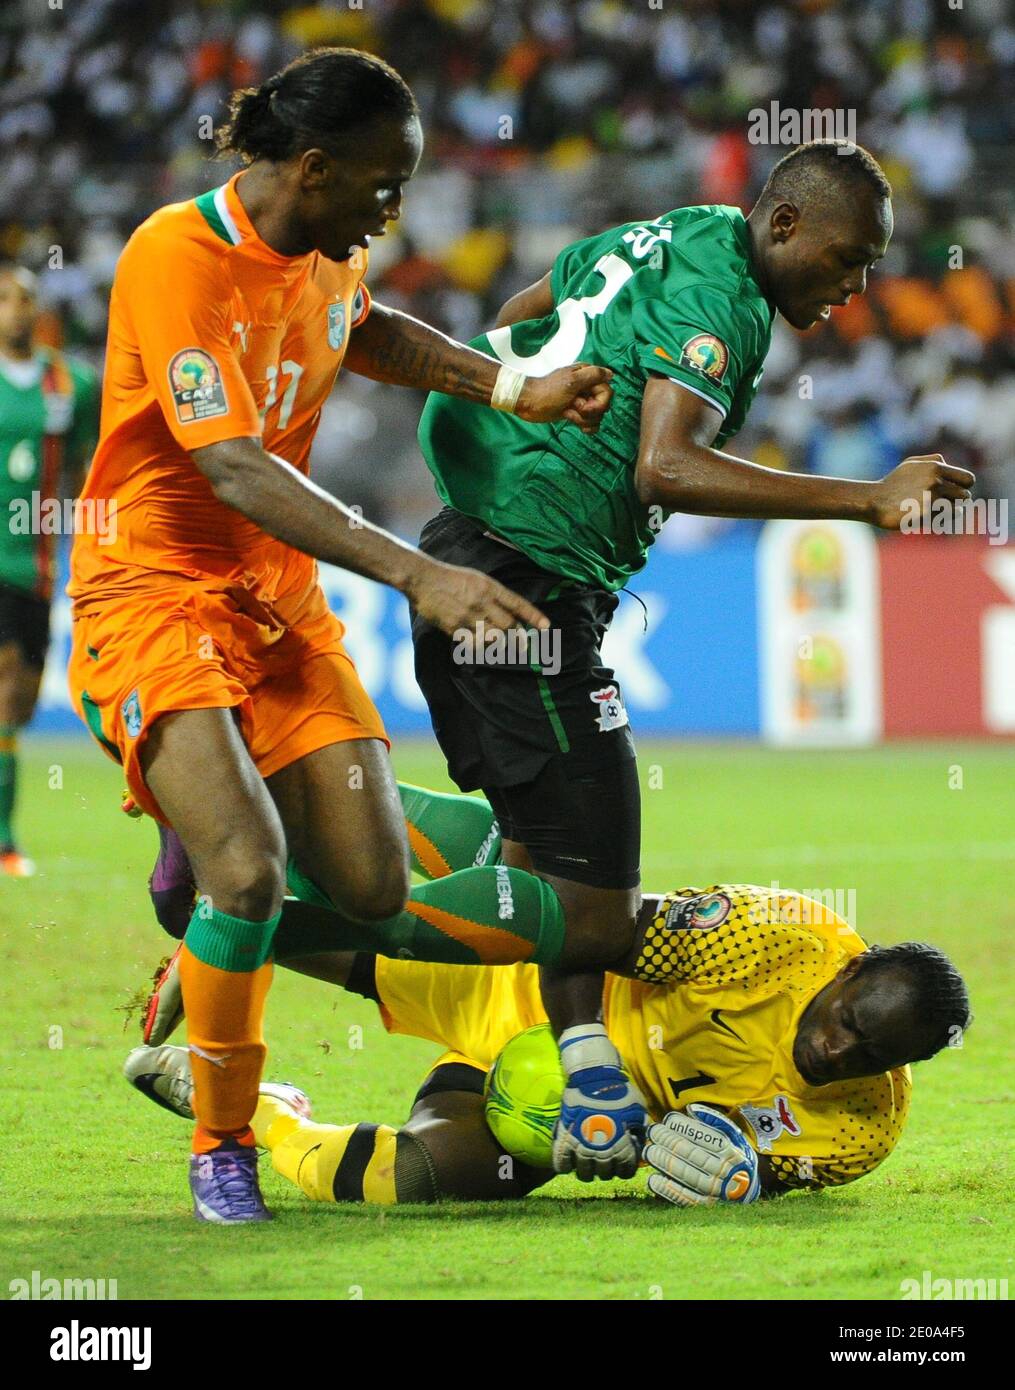 Ivory Coast's Didier Drogba and Zambia's Stophira Sunzu and Boubacar Barry during the 2012 African Cup of Nations Soccer Match, Final, Zambia Vs Ivory Coast in Libreville, Gabon on February 12, 2012. Photo by ABACAPRESS.COM Stock Photo